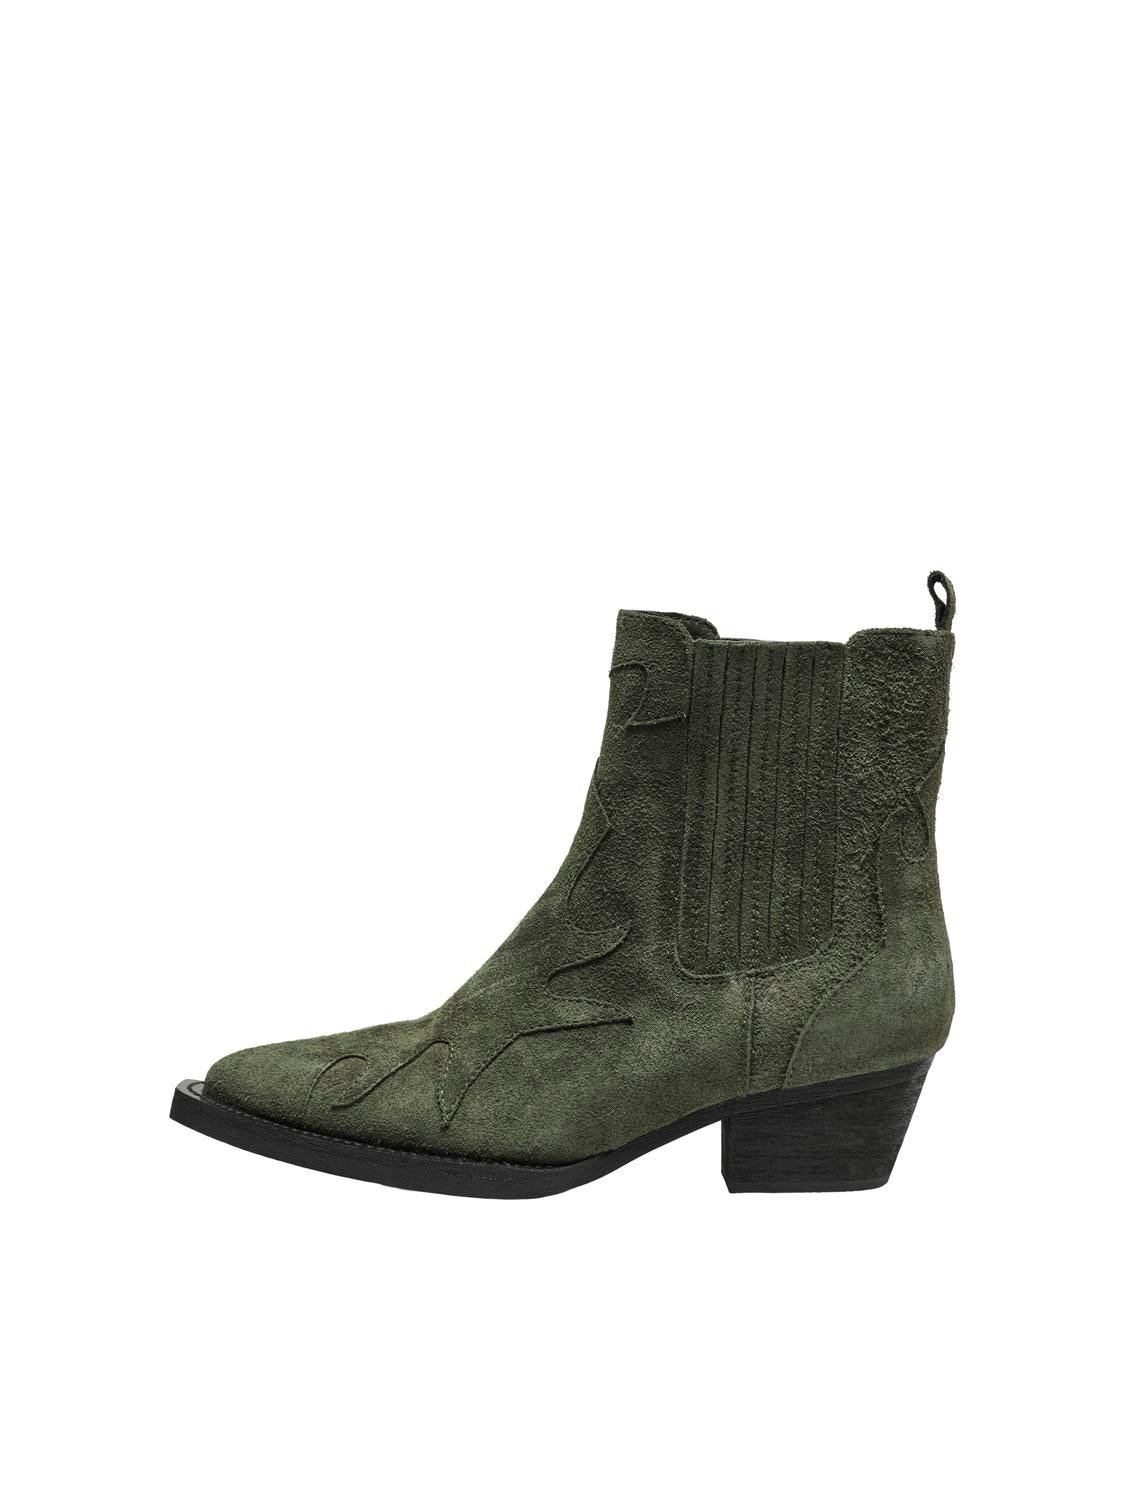 ONLY Leather Boots with pattern -Green Olive - 15287492